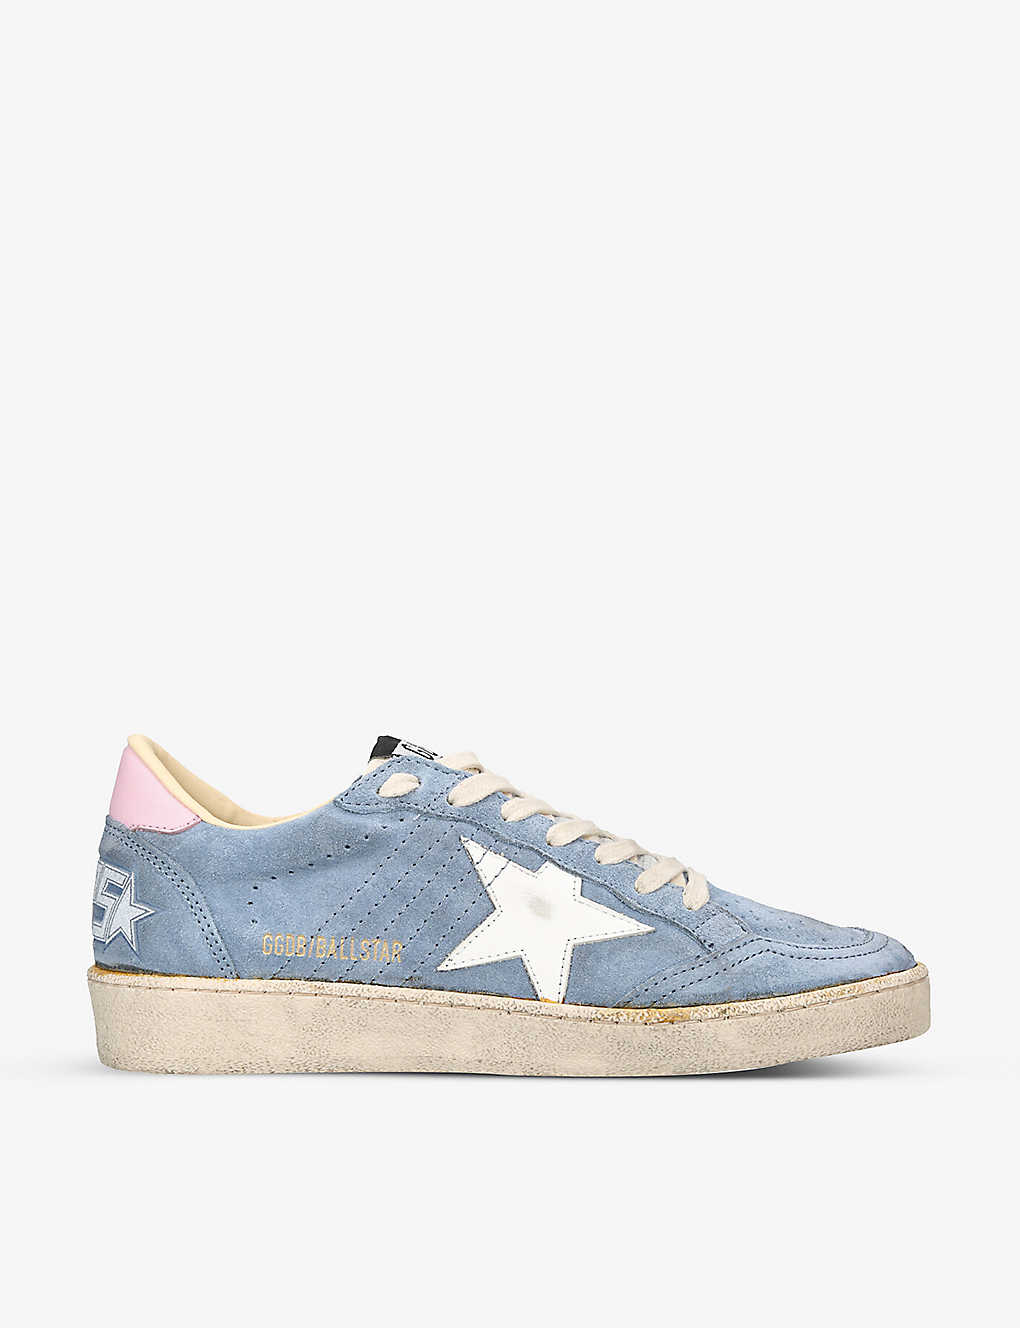 Shop Golden Goose Women's Blue Other Women's Ball Star 50758 Distressed Suede Low-top Trainers